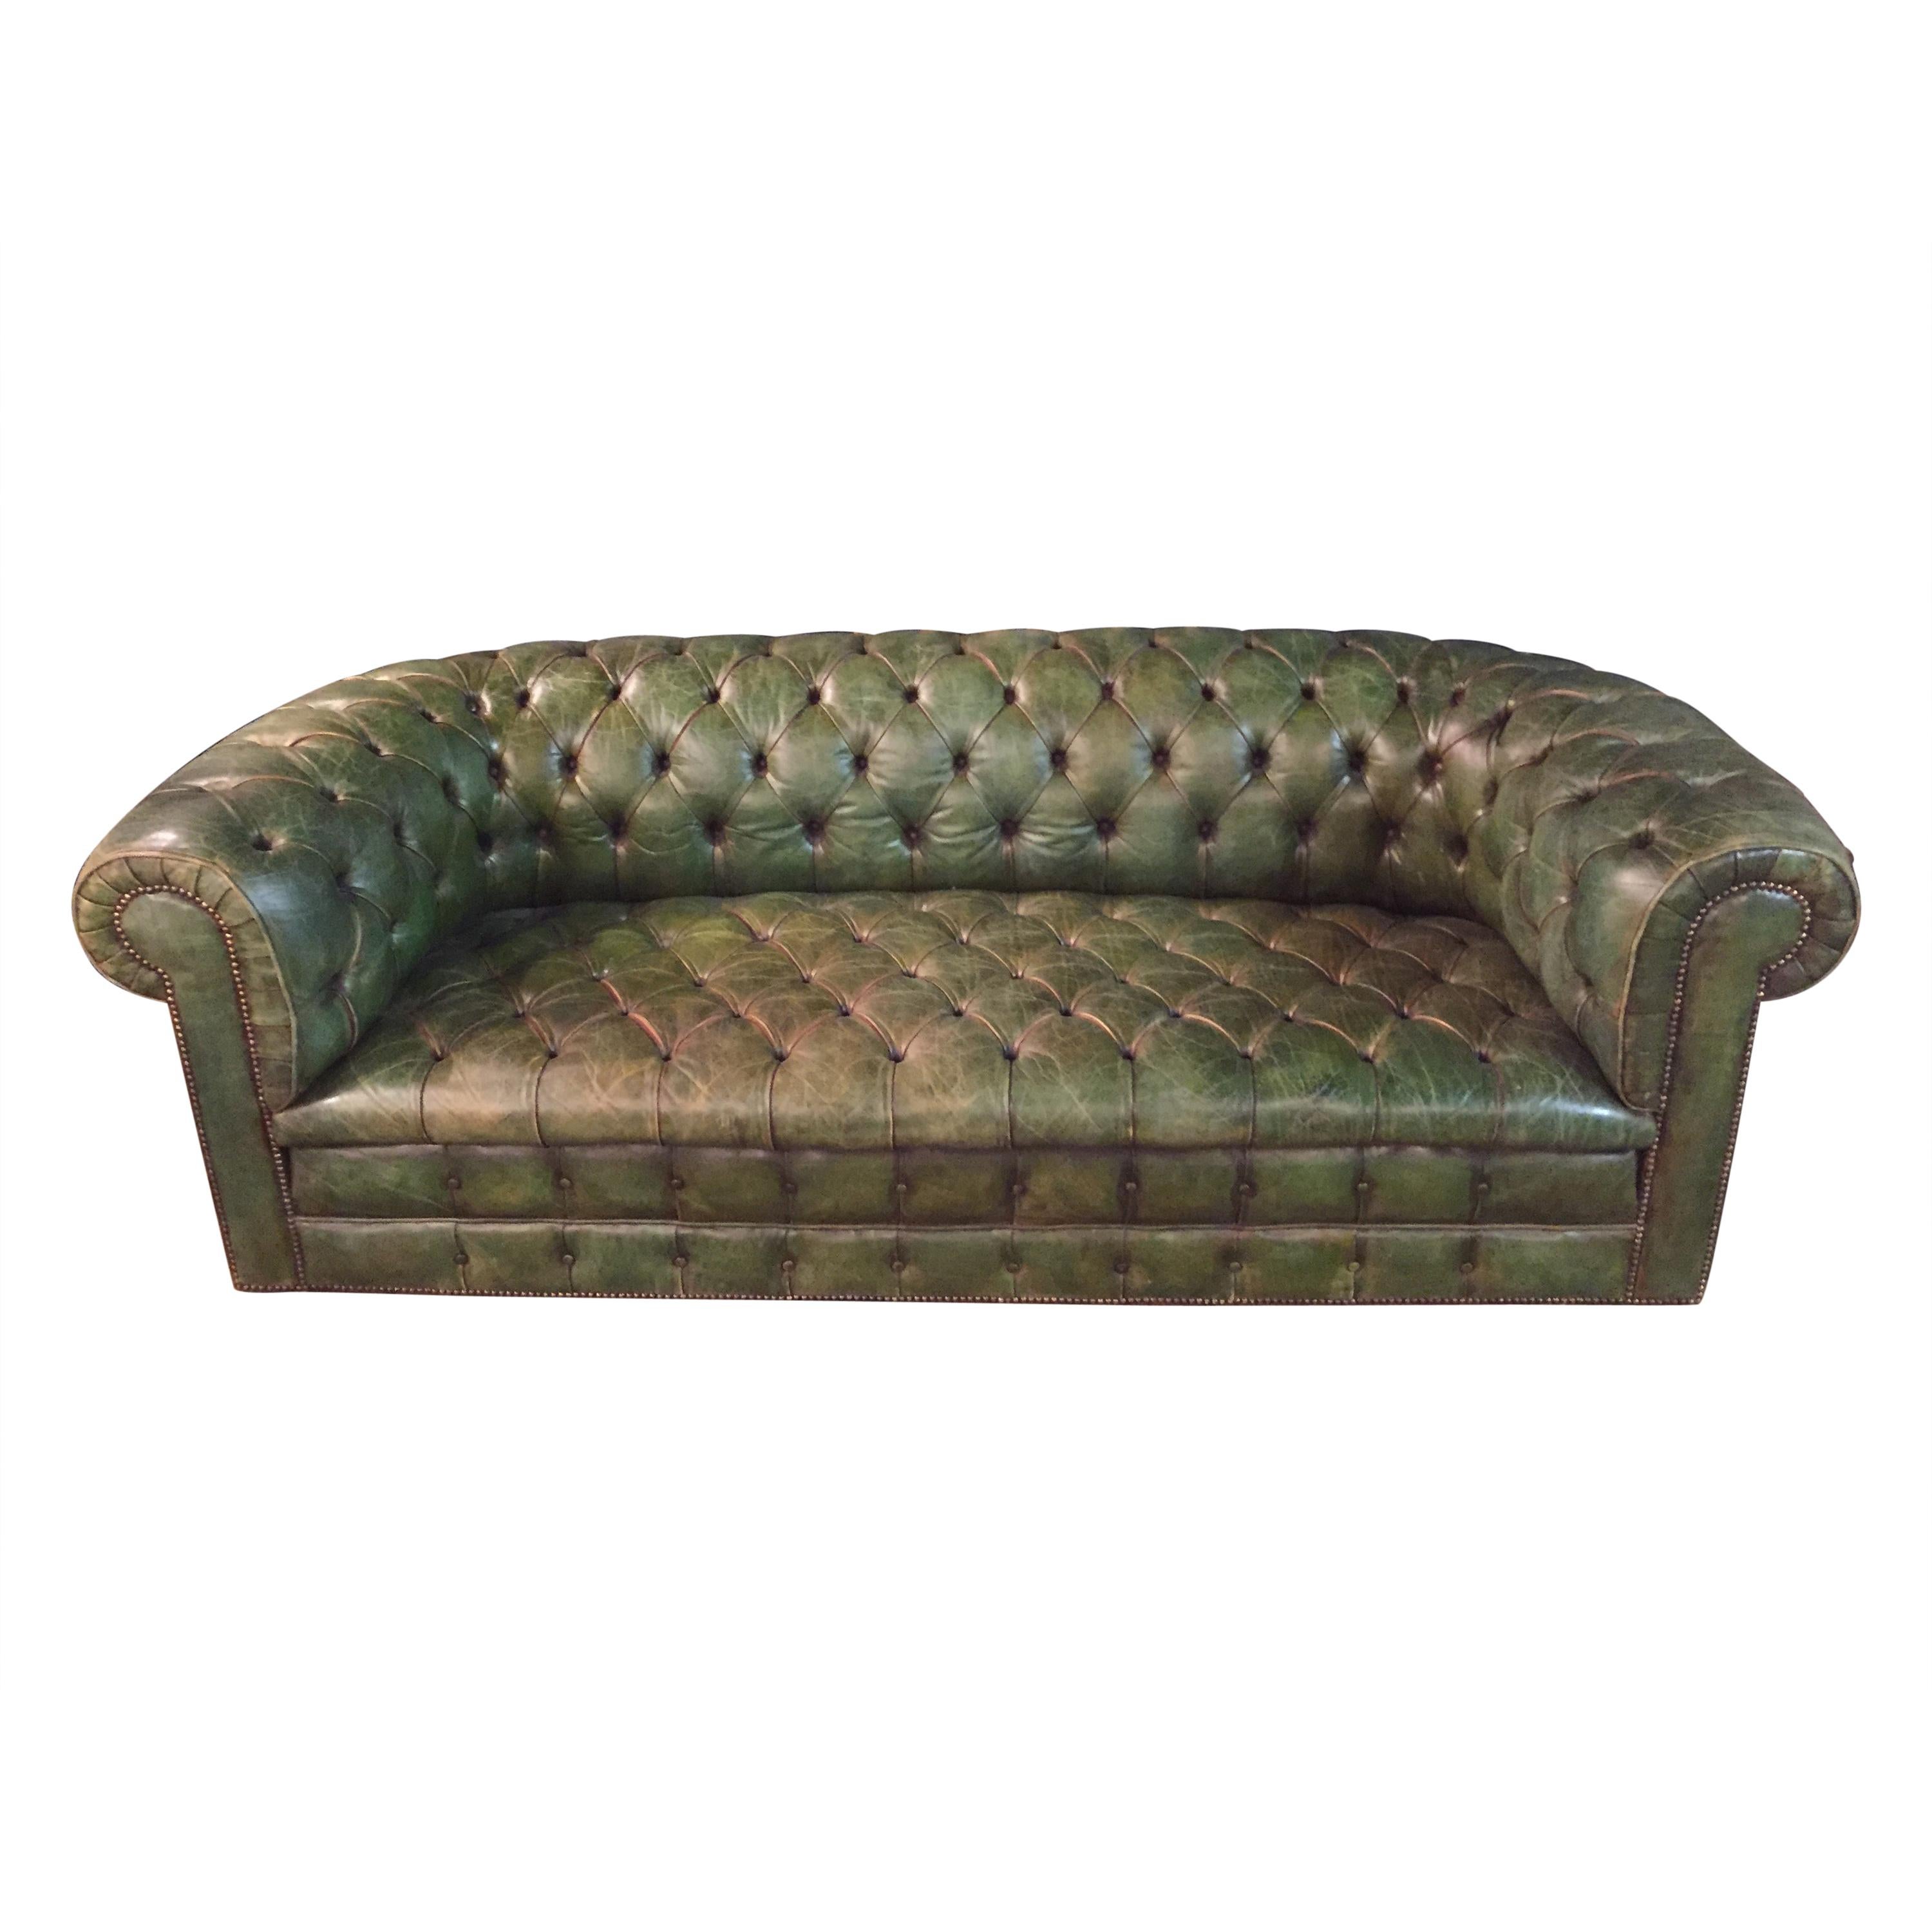 Original Chesterfield Sofa Faded Green from 1978 High Quality